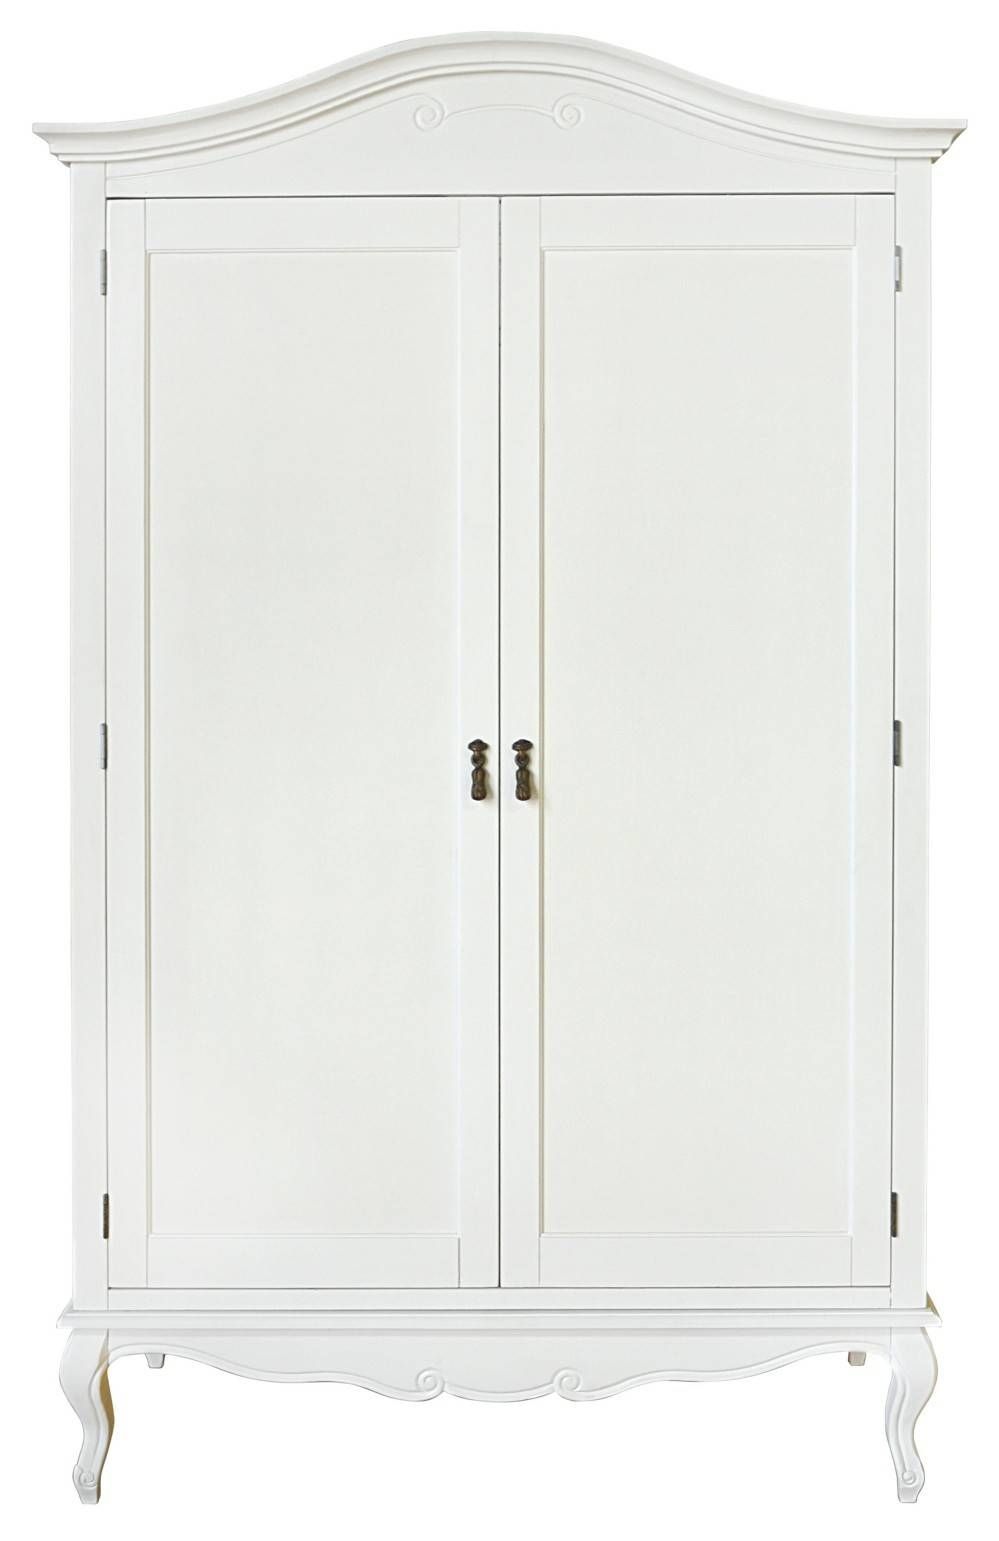 Wardrobes | Bedroom Furniture Direct Intended For Double Rail Wardrobe (View 10 of 30)